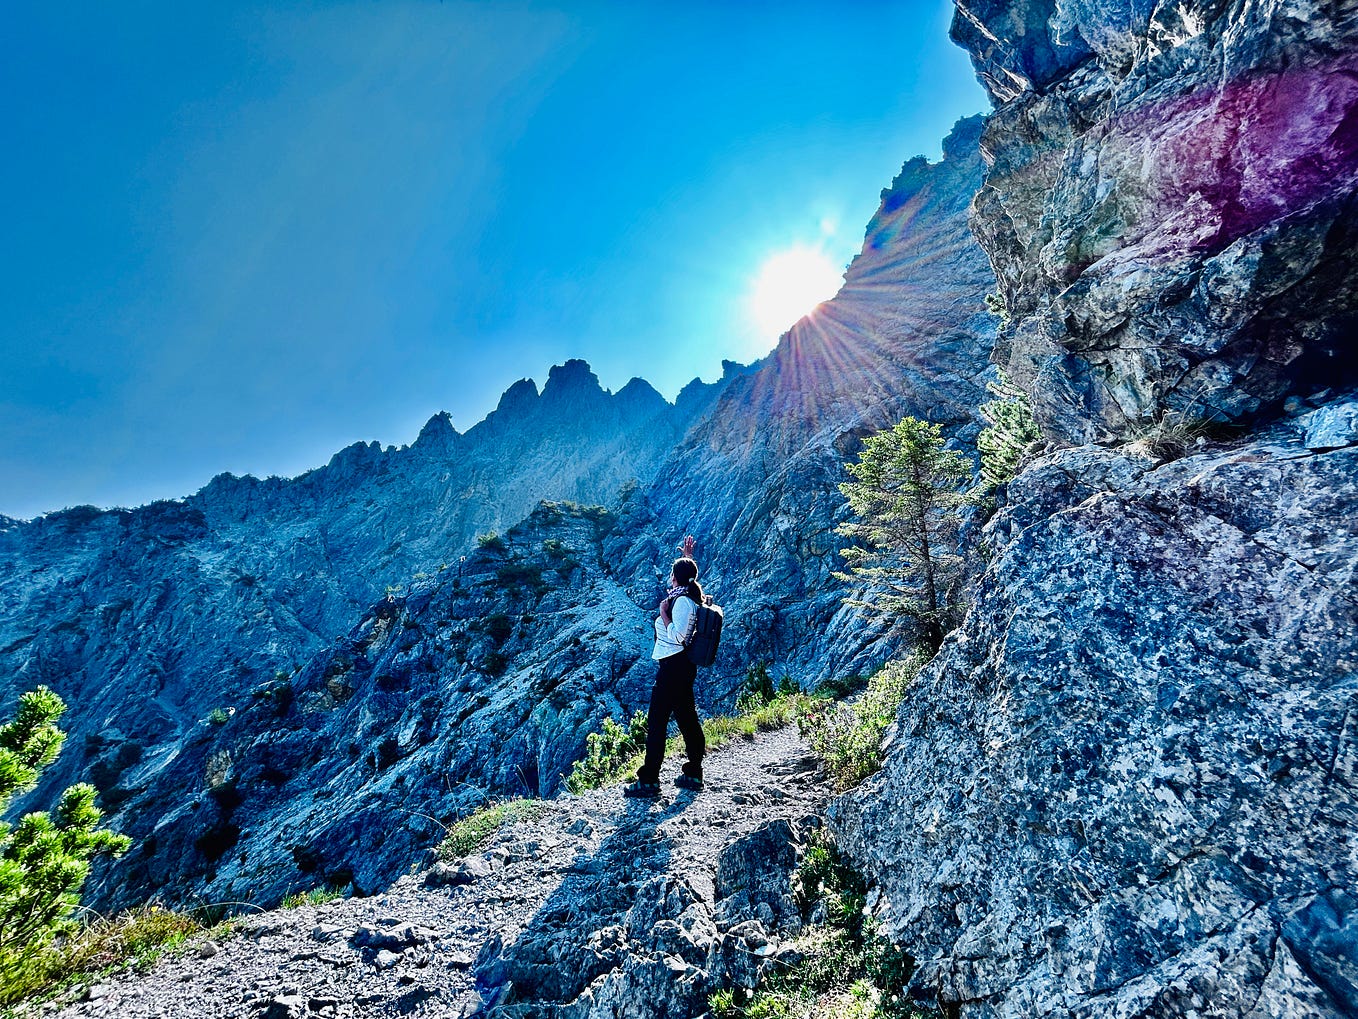 a mountain rocks with a sun shining on top of the rocks and a blue sky with the woman standing on the rocks